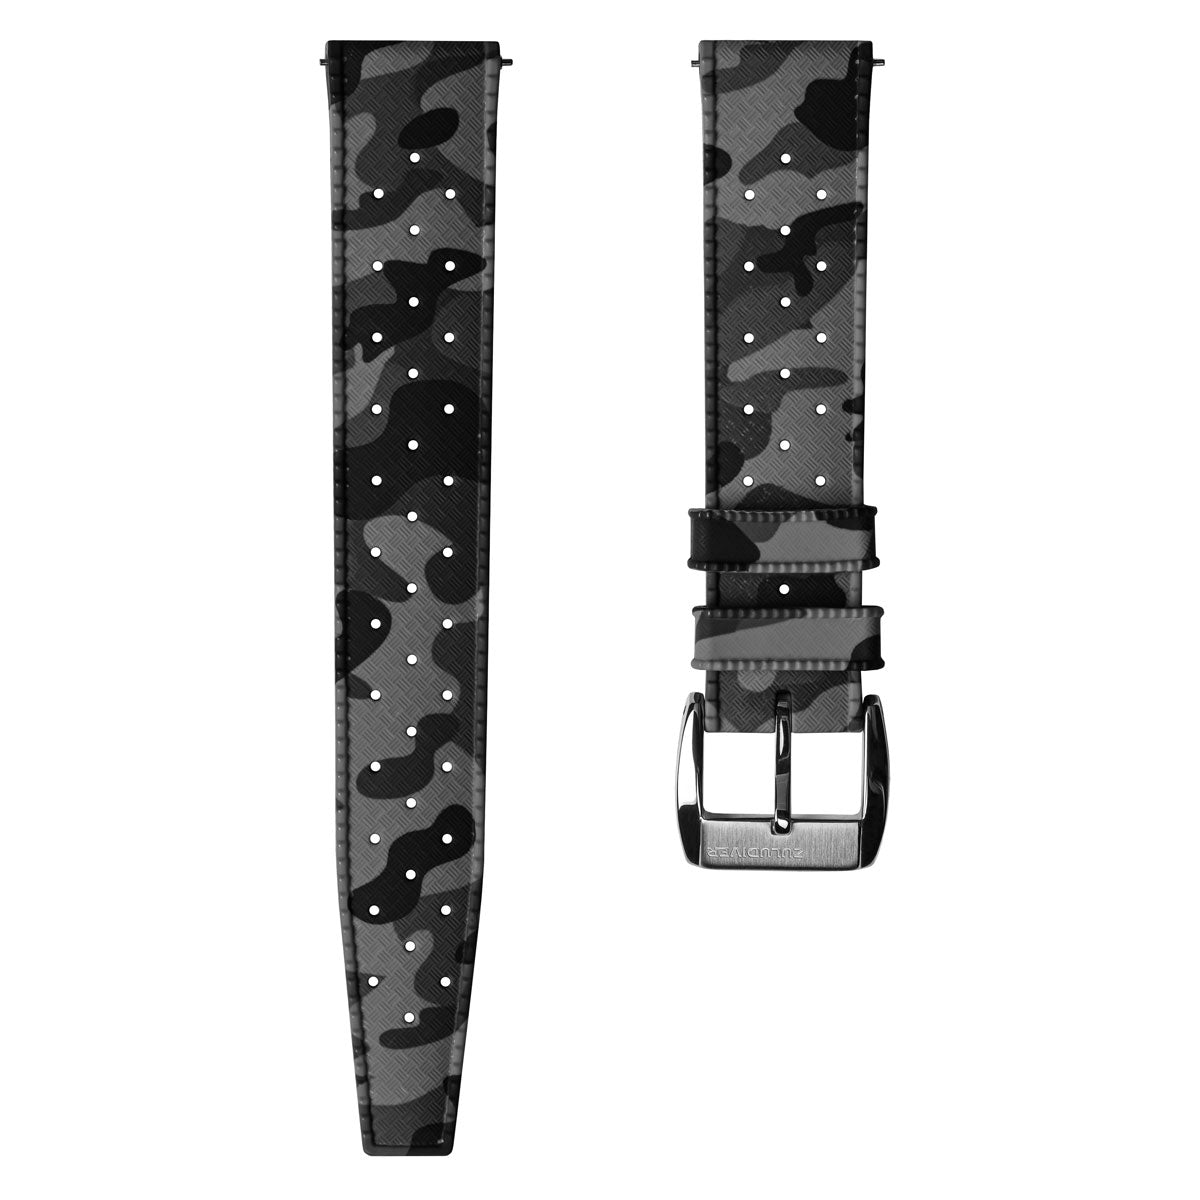 ZULUDIVER Tropical Style Camo Rubber Watch Strap - Grey